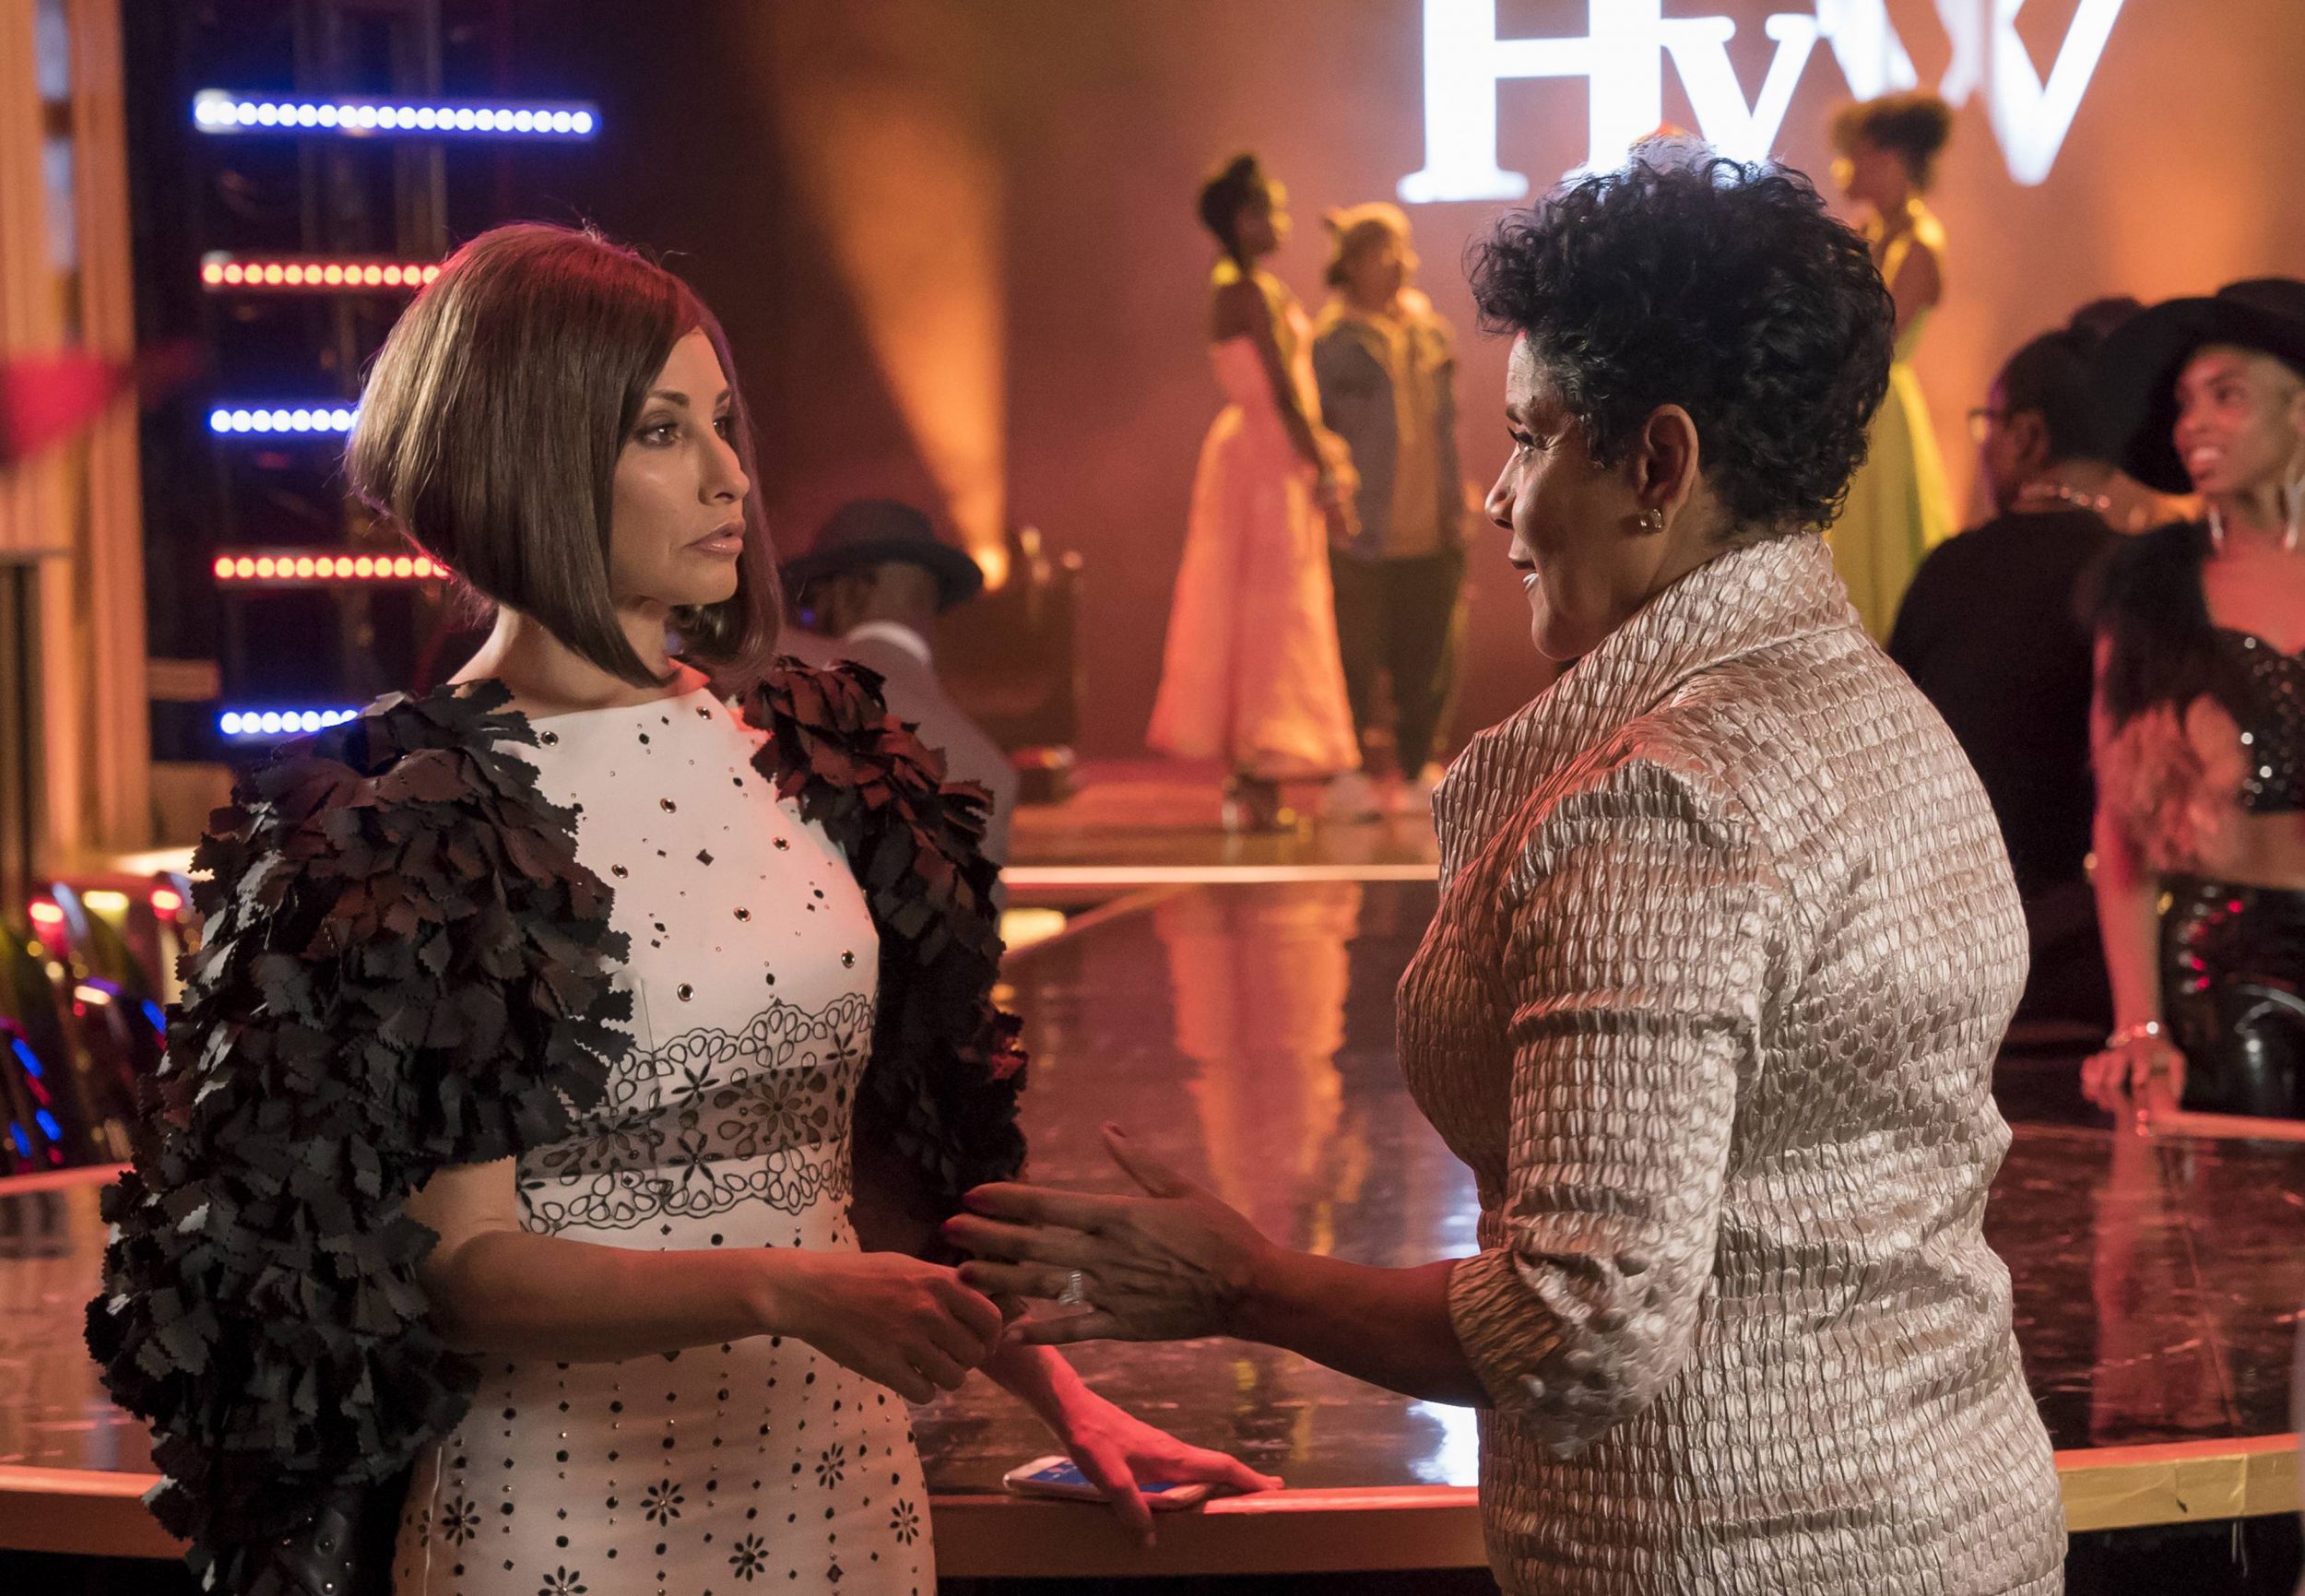 EMPIRE: Pictured L-R: Guest stars Gina Gershon and Phylicia Rashad in the "The Unkindest Cut" episode of EMPIRE airing Dec. 7 (9:00-10:00 PM ET/PT) on FOX. ©2016 Fox Broadcasting Co. CR: Chuck Hodes/FOX